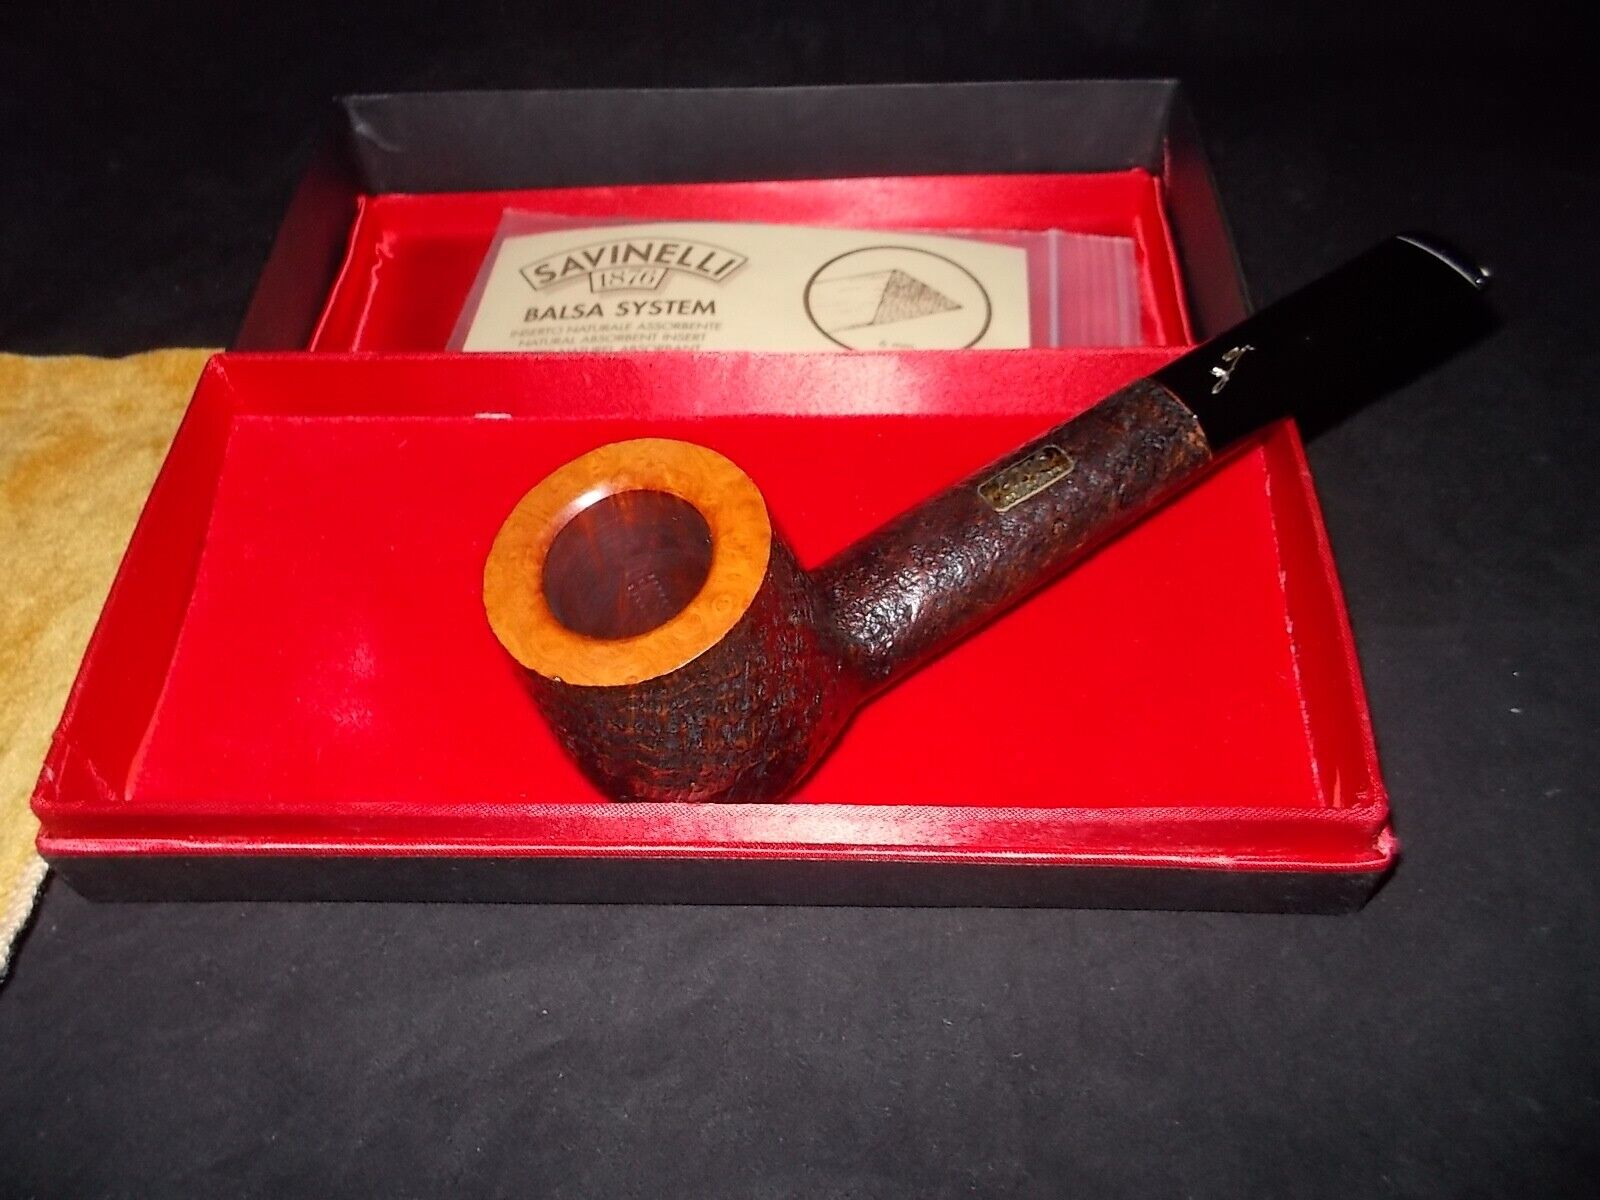 🔴 SAVINELLI COLLECTION PIPE YEAR 2006 SLEEVE, BOX & BALSA SYSTEM FILTERS (20)